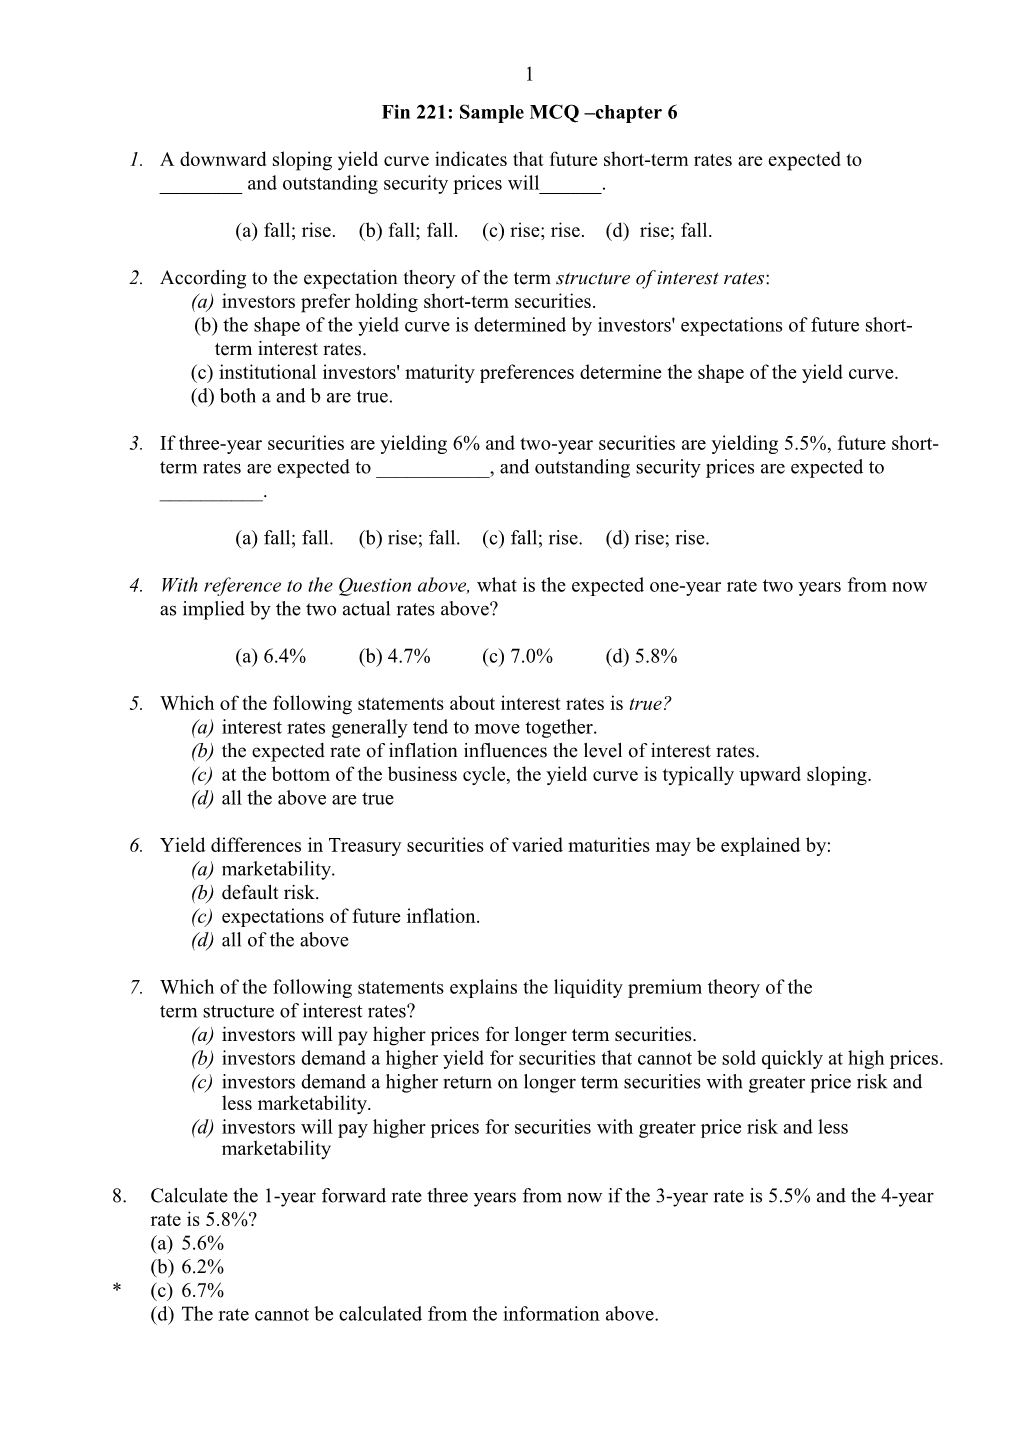 Fin 221: Sample MCQ Chapter 6